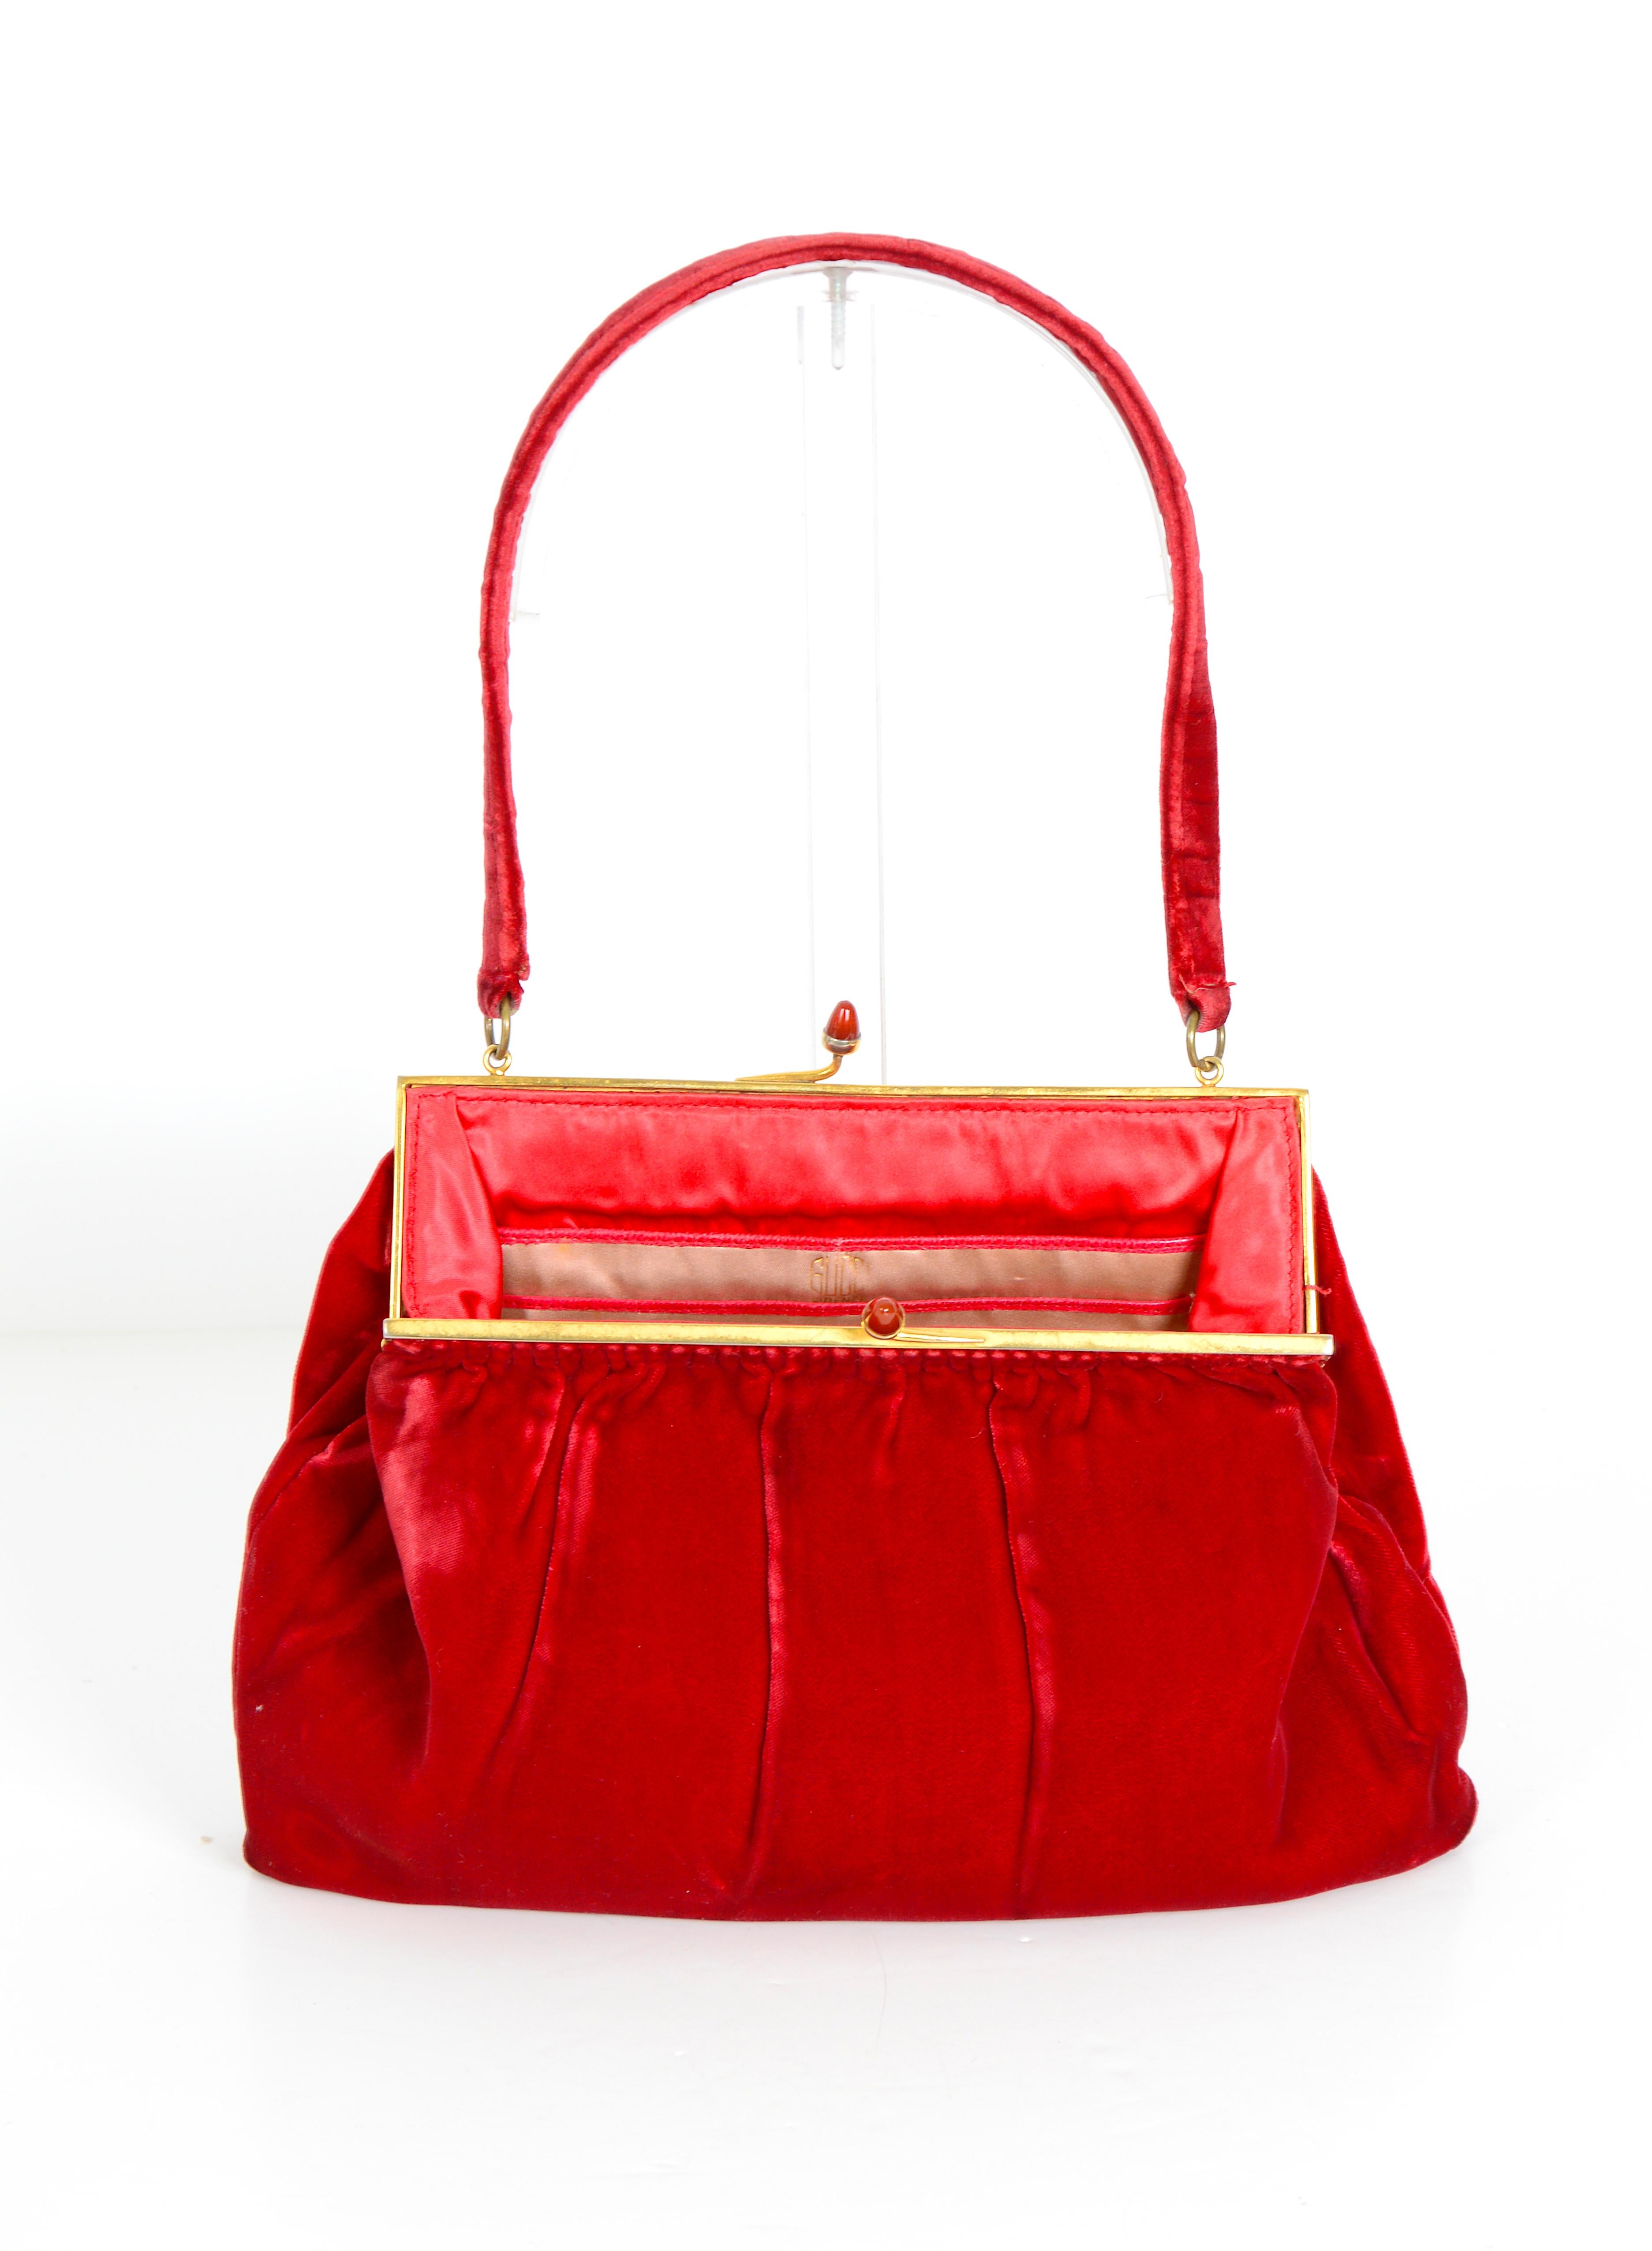 Red Gucci vintage 1970s silk velvet top handle bag with a stone jewel closure